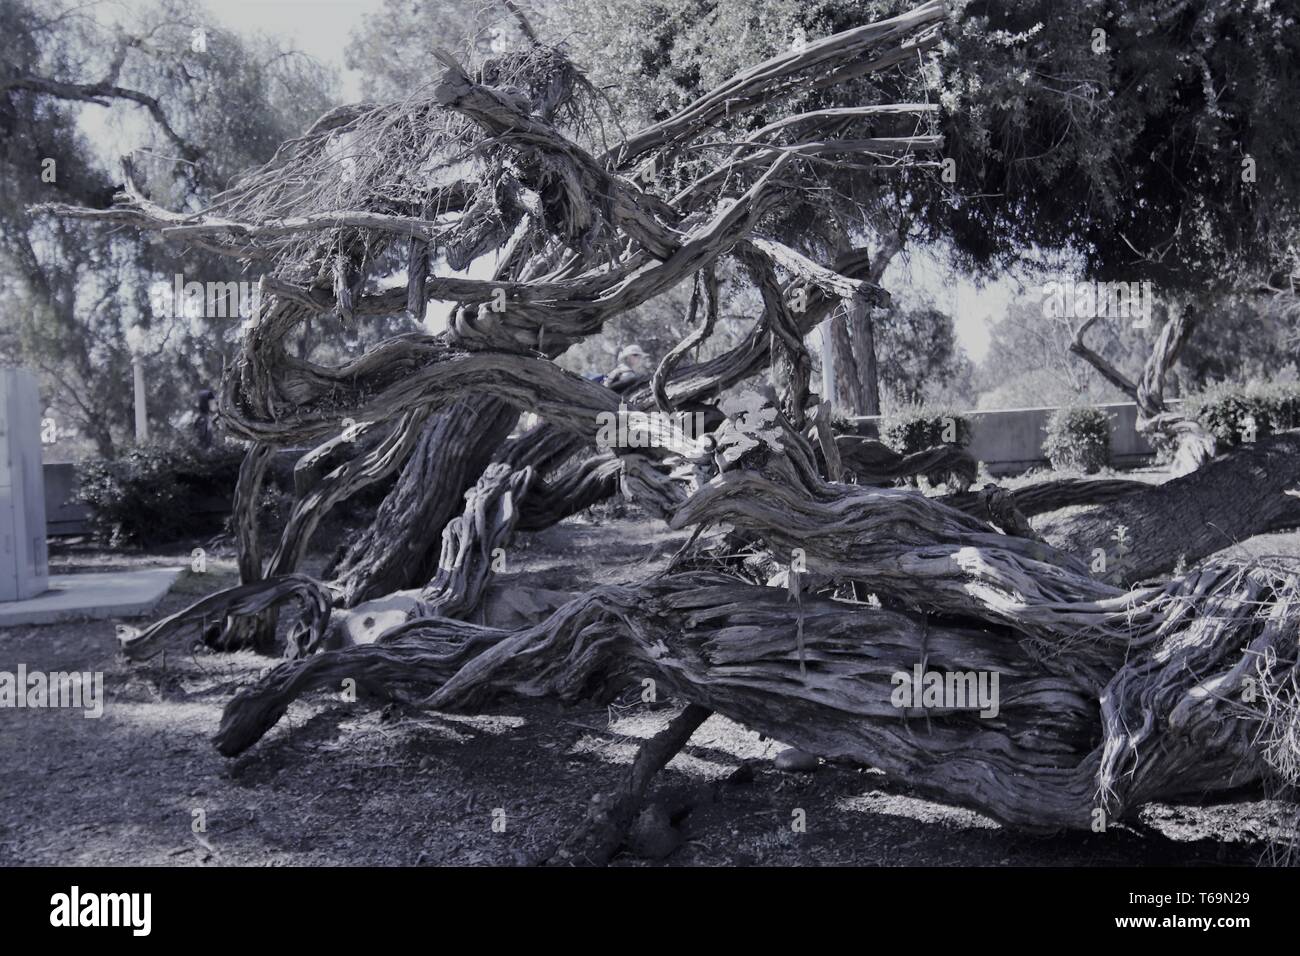 Twisted branches and tree roots at Balboa Park Stock Photo